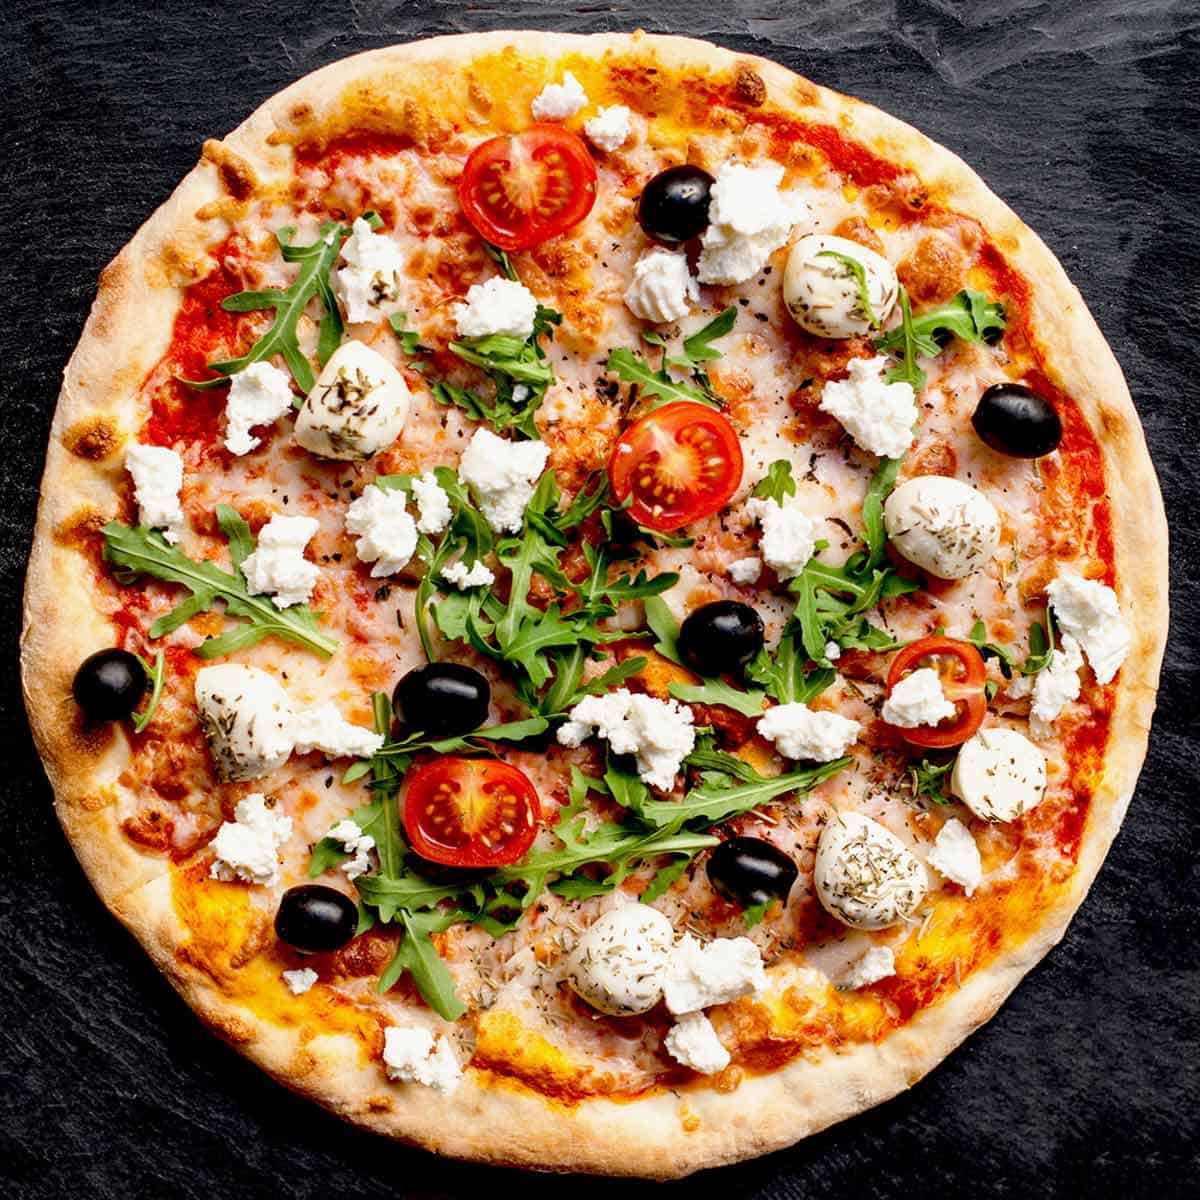 A large homemade pizza with tomatoes, olives and fresh mozzarella cheese.